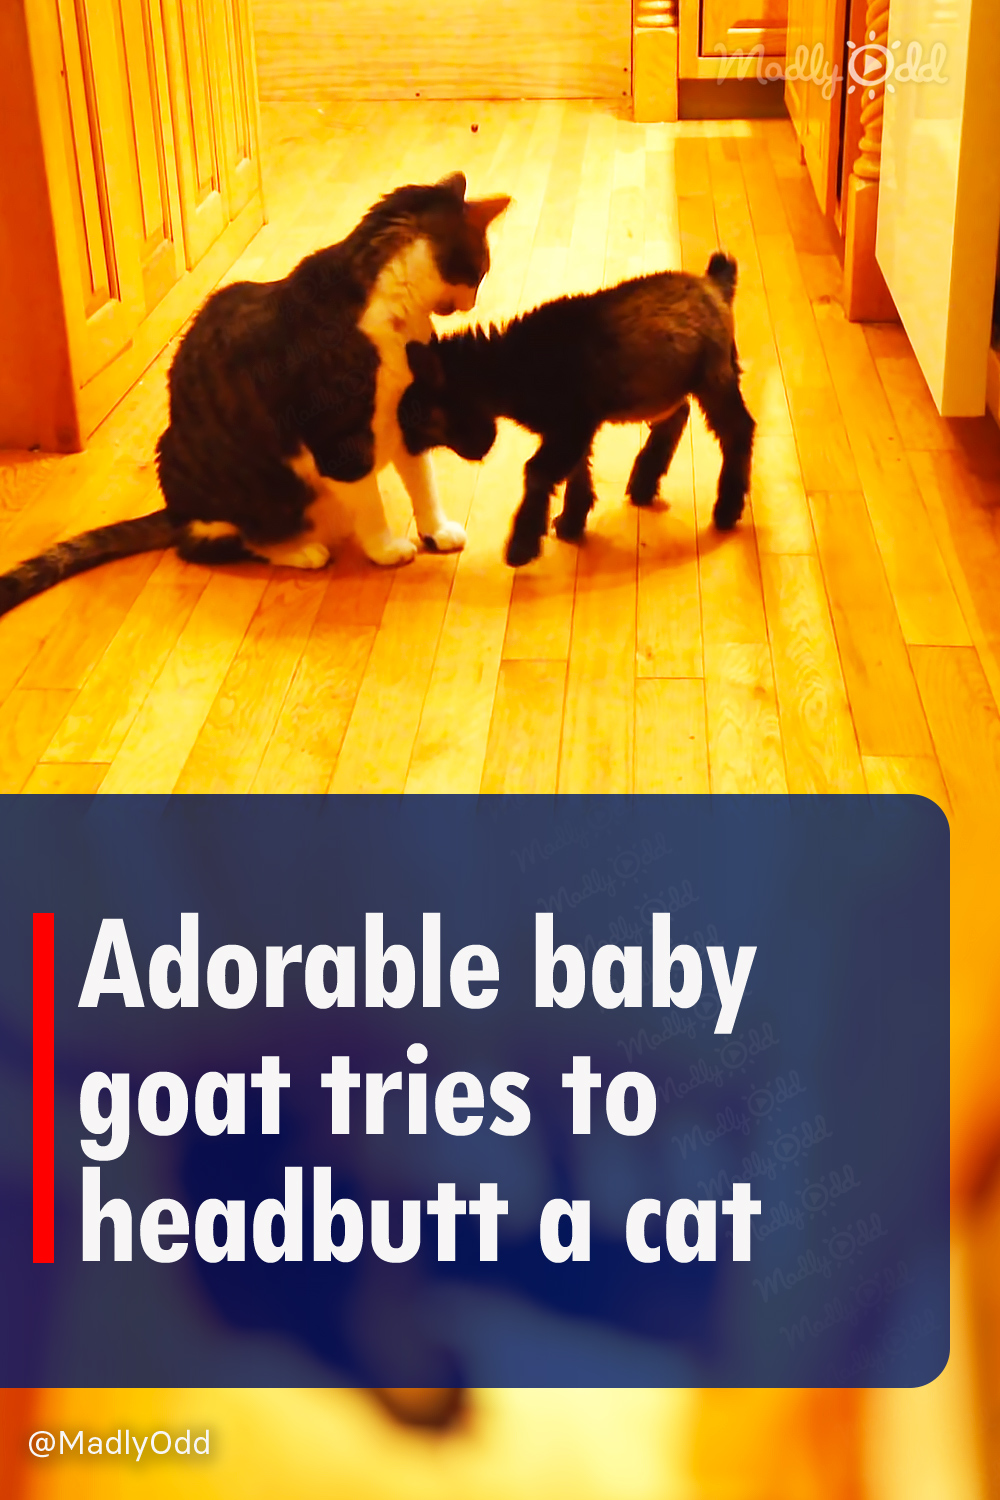 Adorable baby goat tries to headbutt a cat